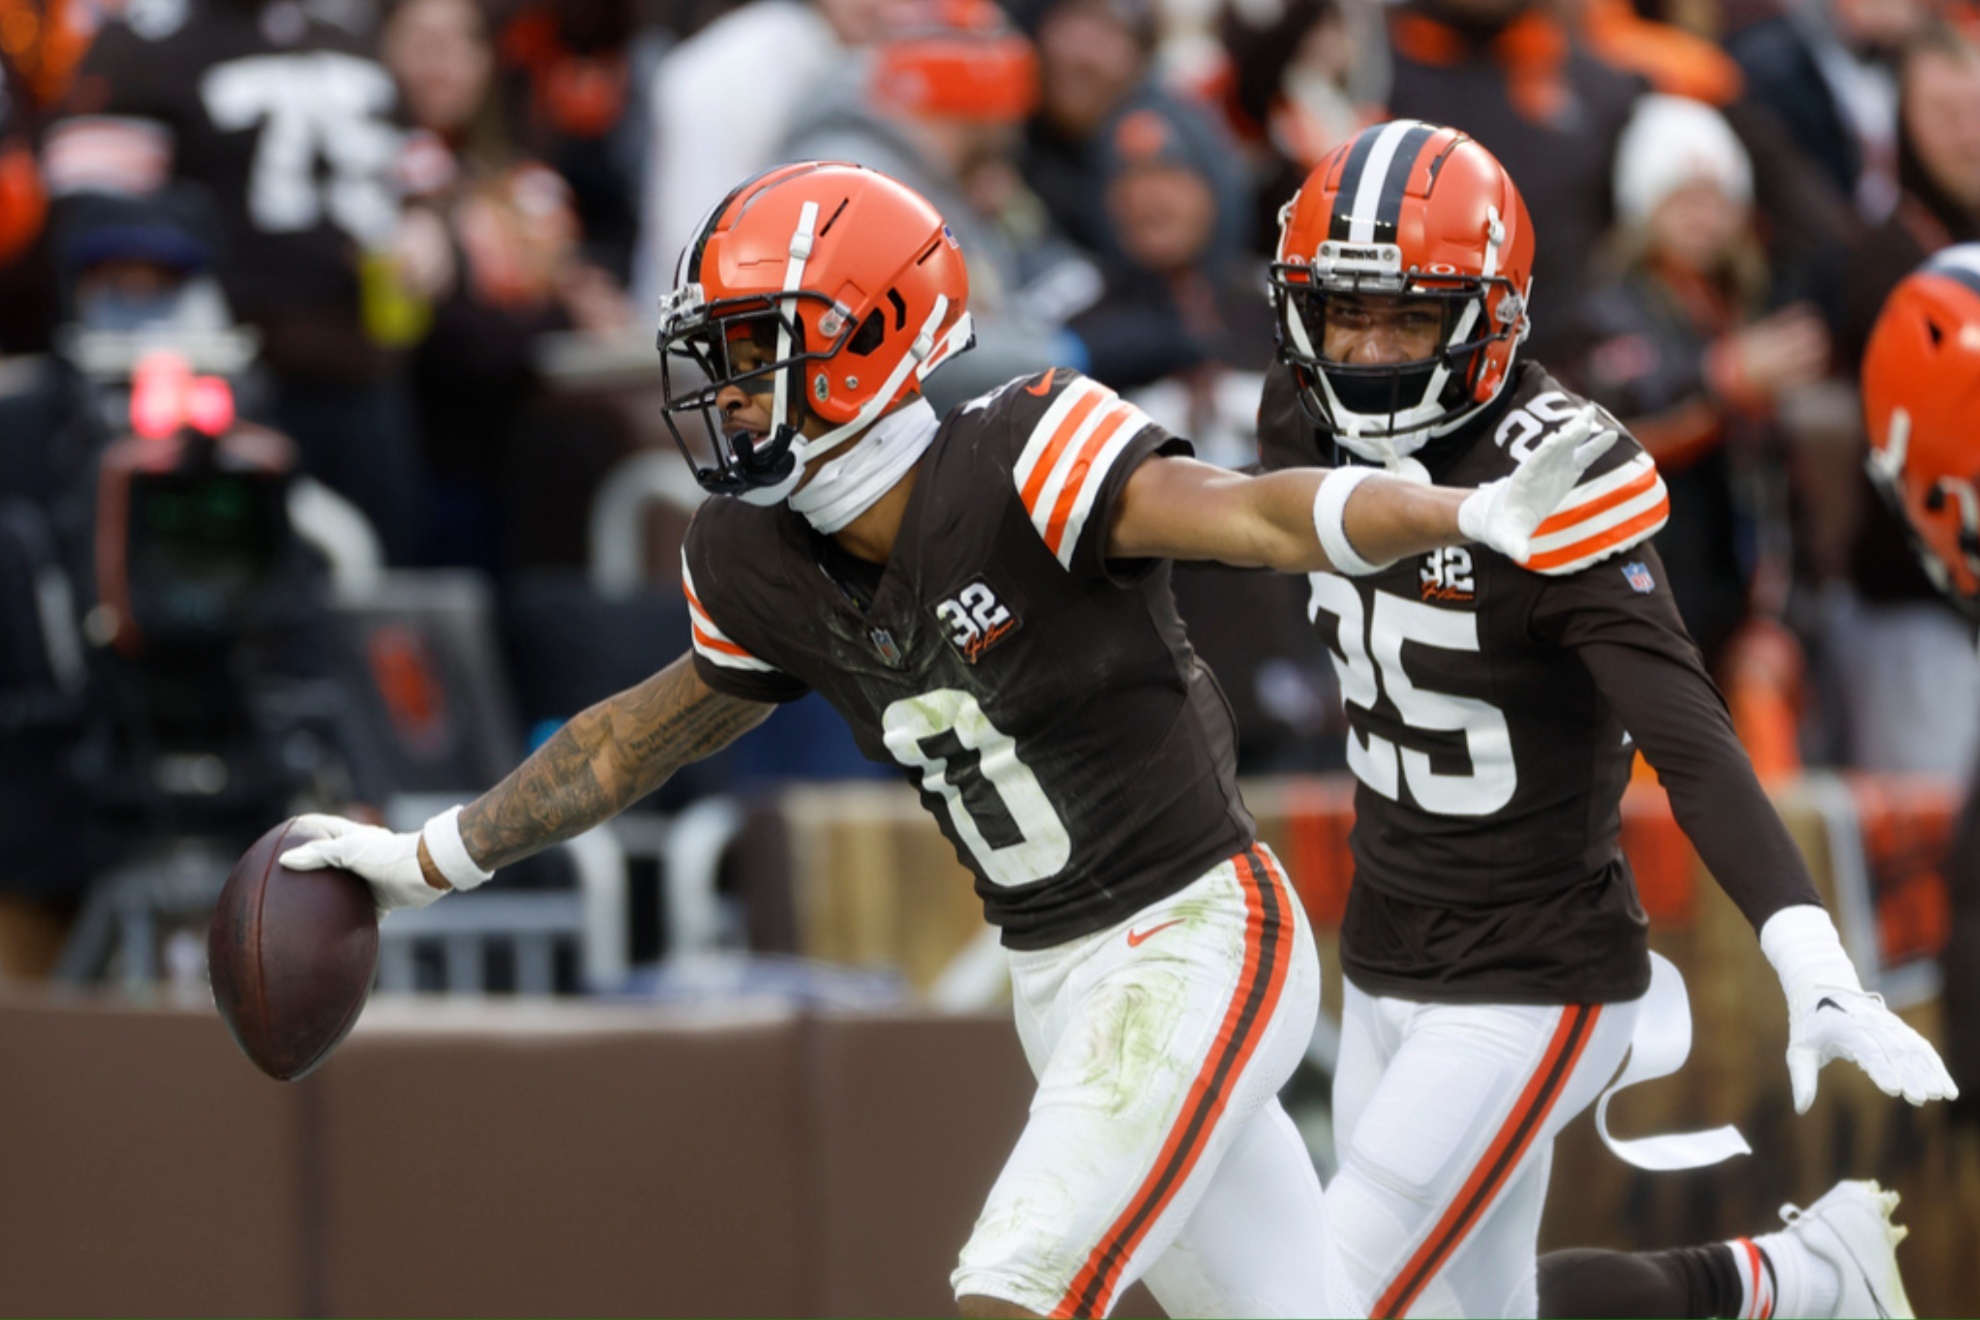 The Cleveland Browns beat the Jacksonville Jaguars at home 31-27